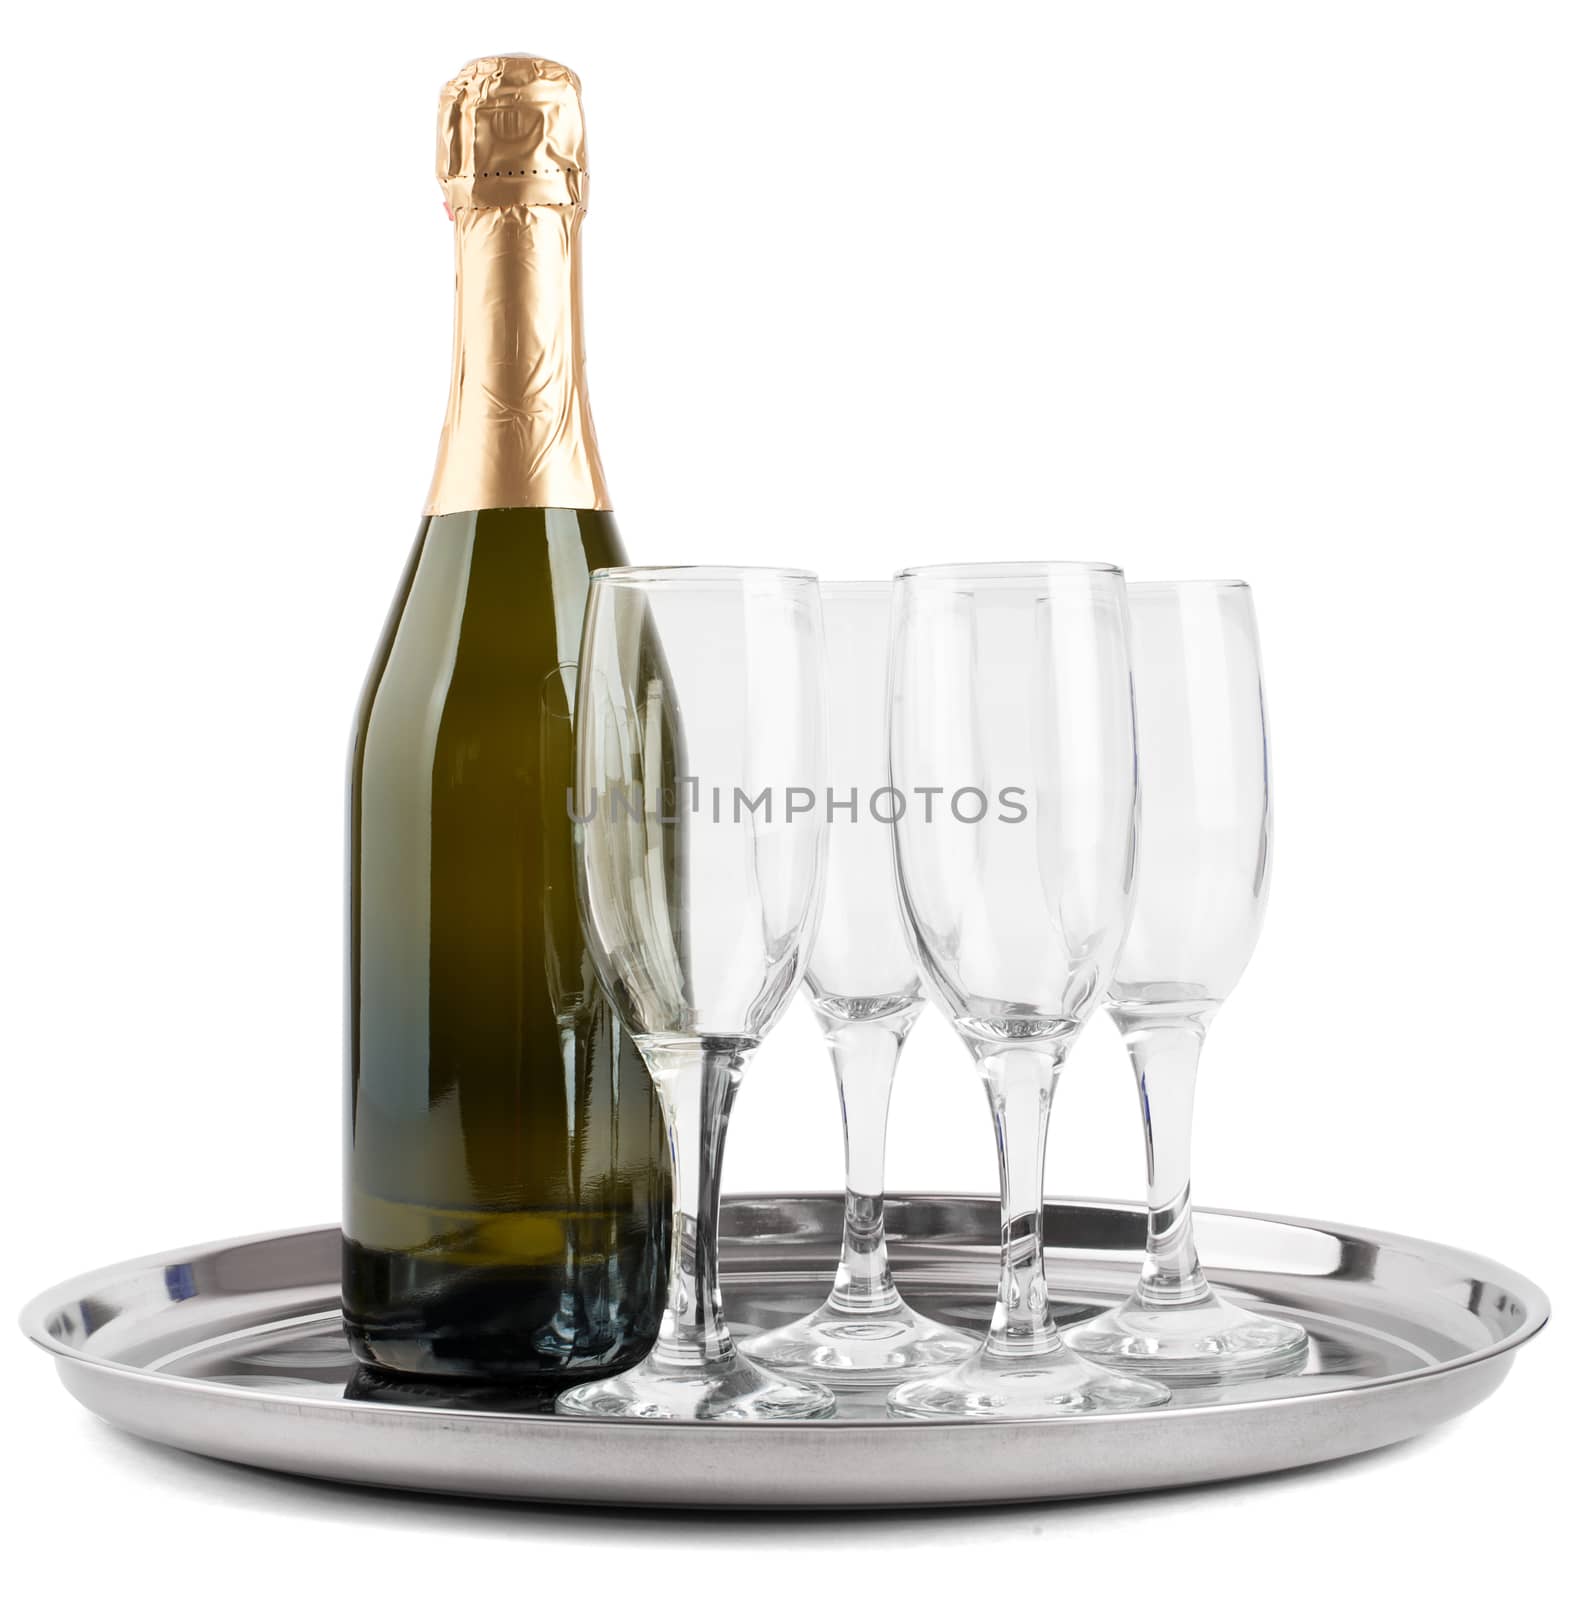 Champagne bottle and four glasses by cherezoff